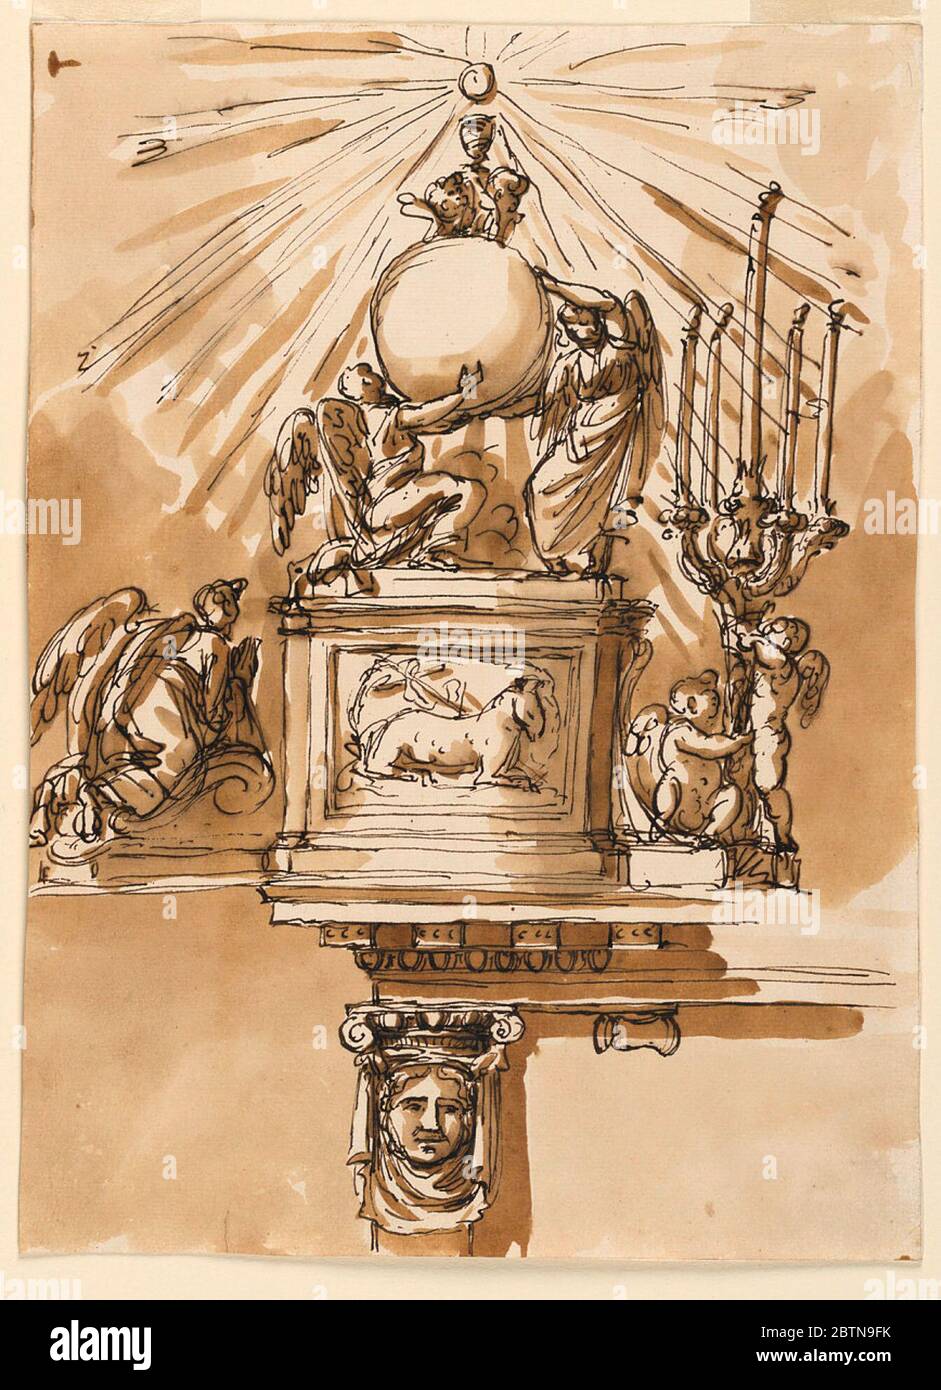 Relief Glory of the sacrament console table. Research in ProgressTop: a) upon a pedestal, showing the Easter lamb in its front panel, two angels, one kneeling, the other one standing. They carry the globe, on top of which two cherubim support the chalice, above which the Host appears, being the center of a glory of rays. Stock Photo